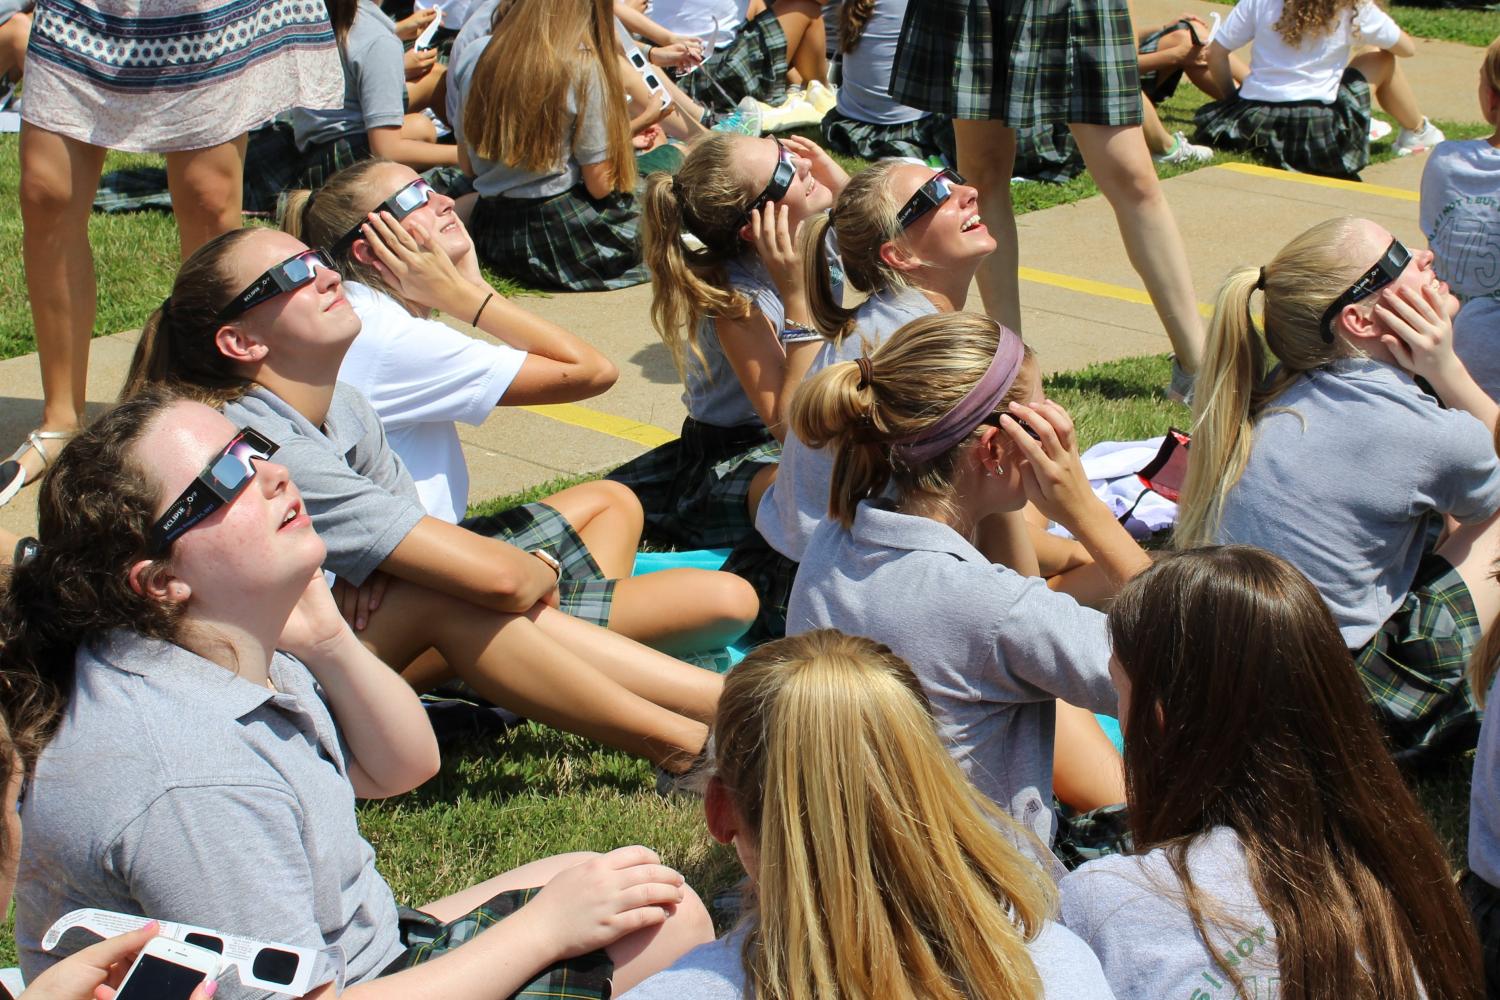 Students sit on the lawn and enjoy the eclipse.